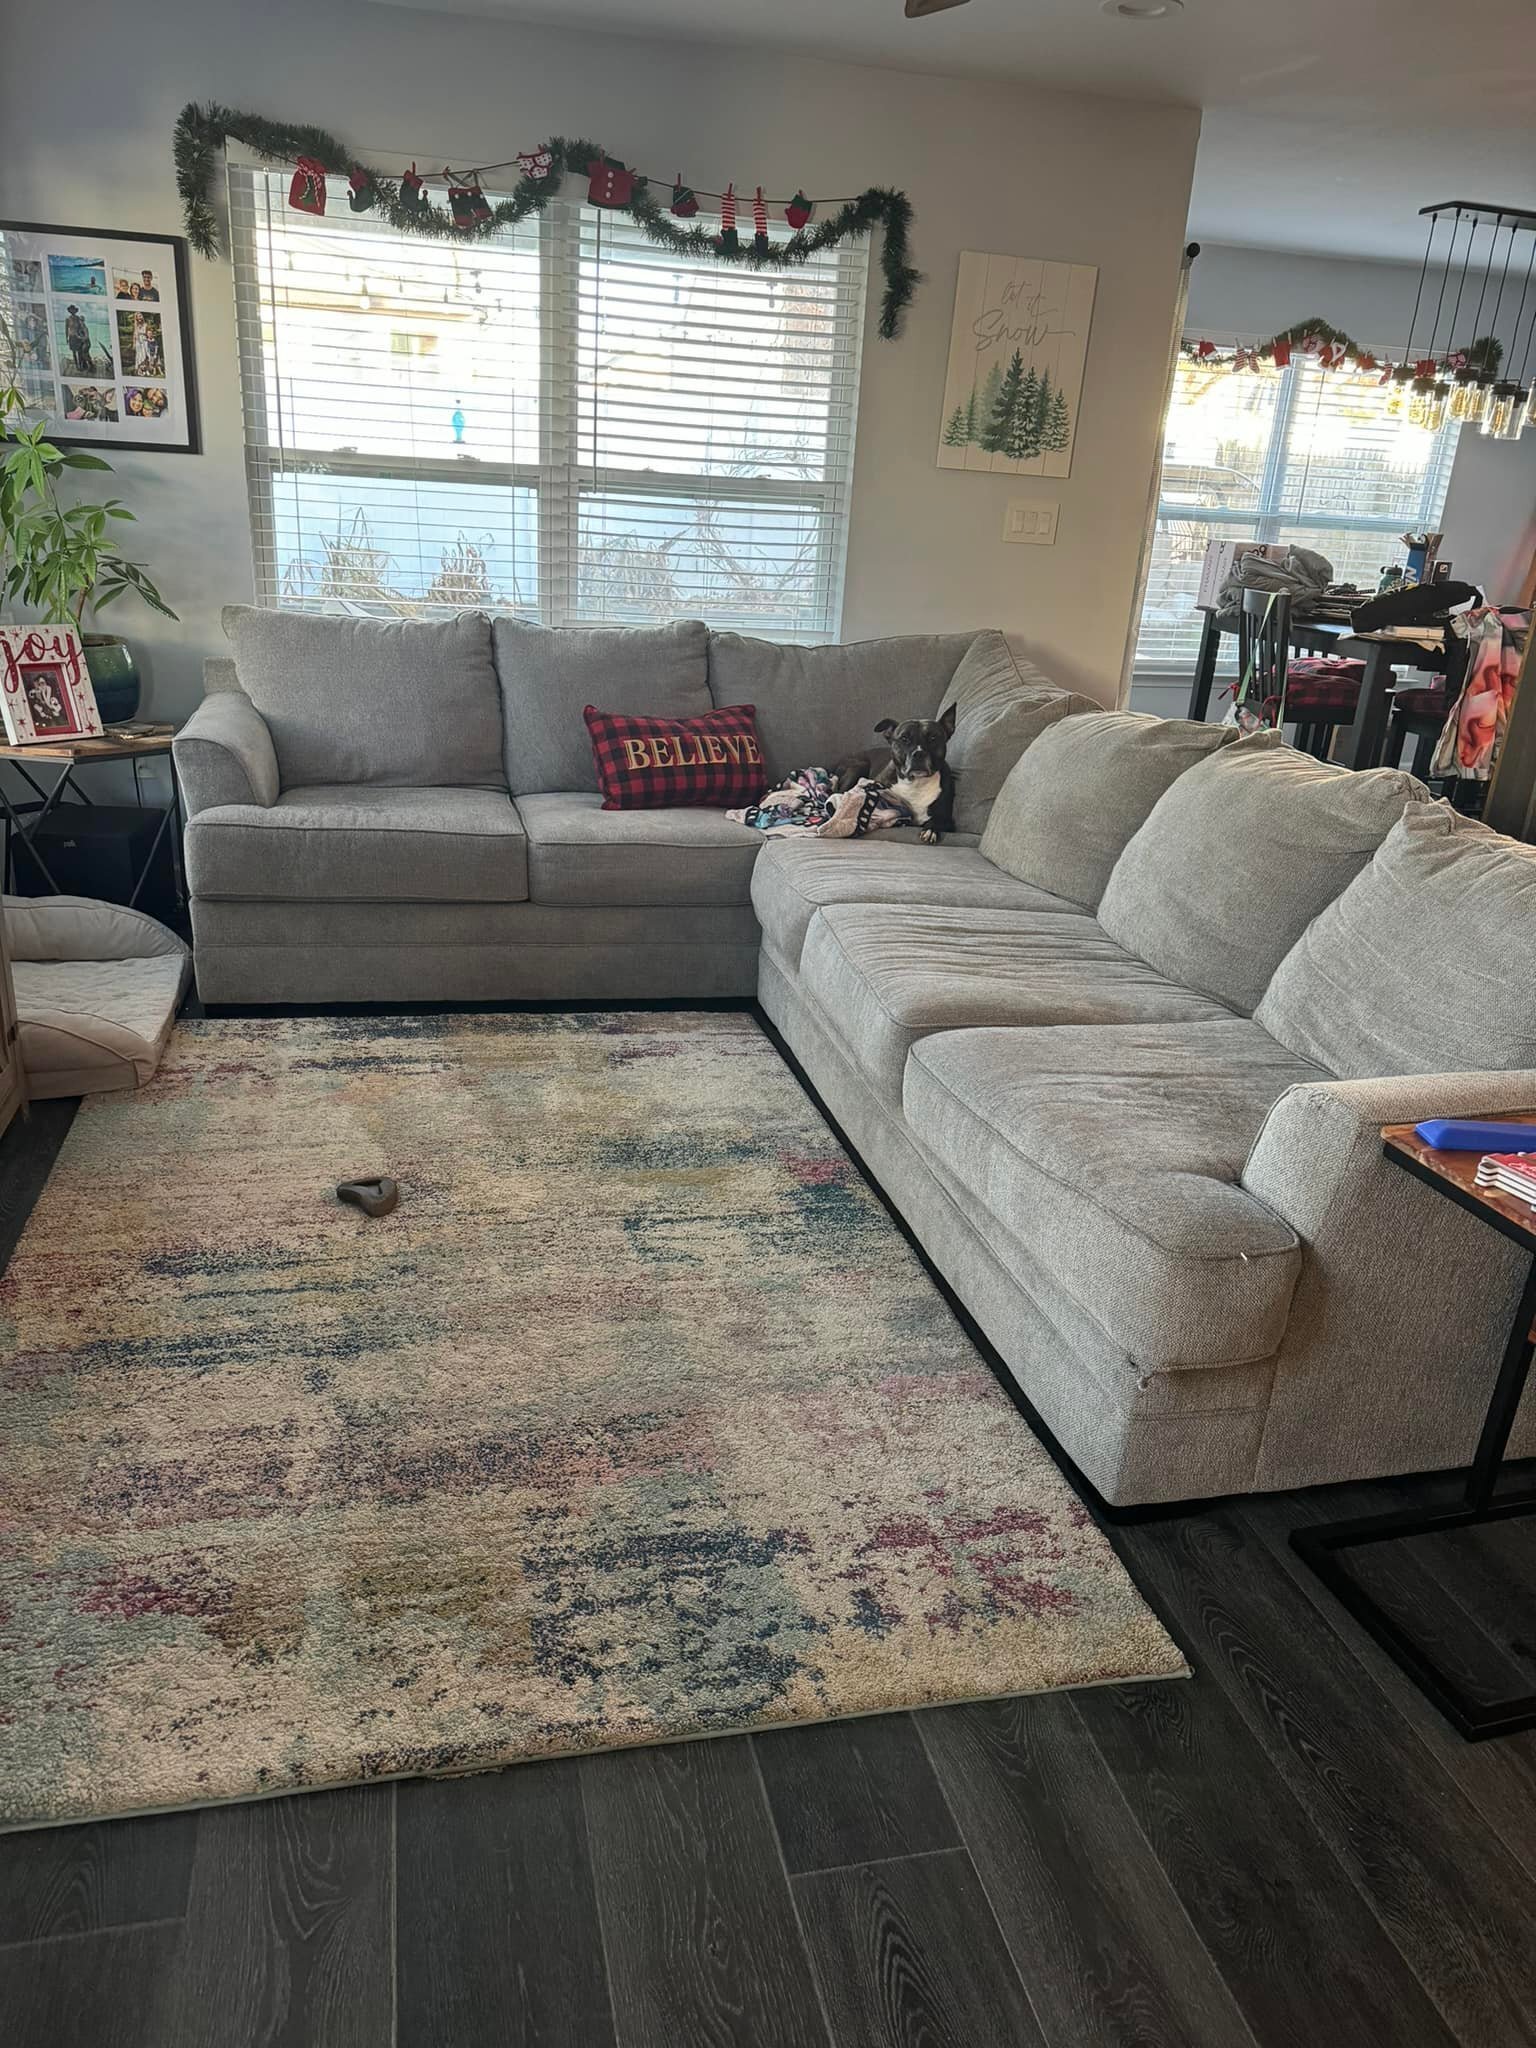 FREE!!! 
Yes we have dogs, and a teenager! These are by no means new but I think they are in great shape for anyone that needs a couch 🤷🏼&zwj;♀️ 
My husband disagrees lol 
Free couch and rug, both were professional cleaned about a month ago, they u